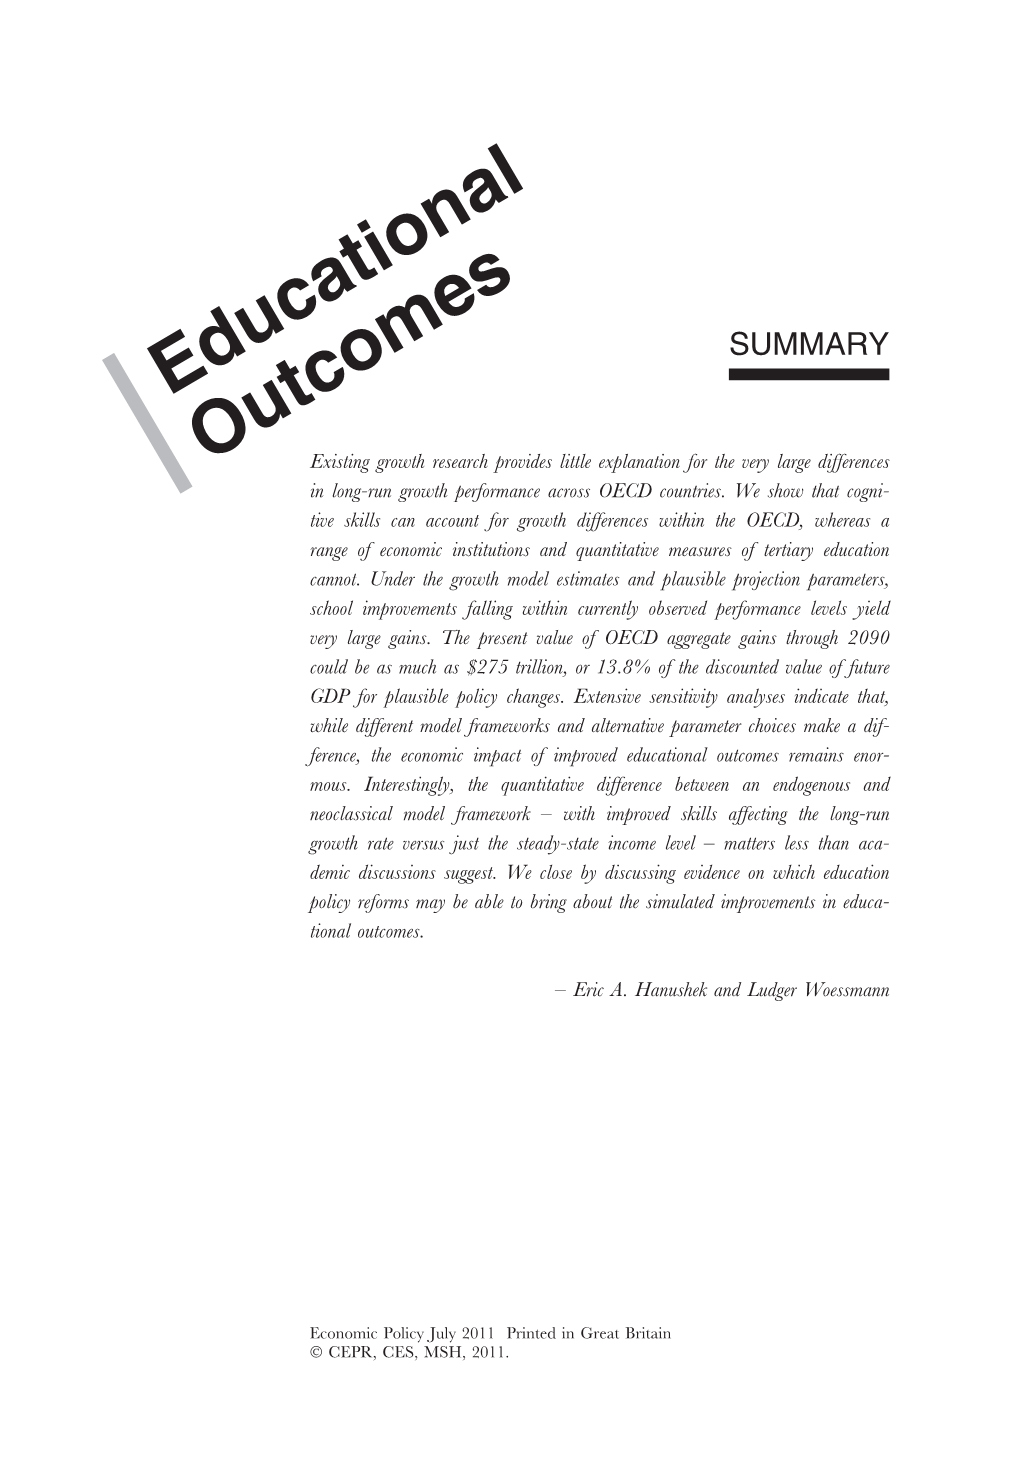 How Much Do Educational Outcomes Matter in OECD Countries?